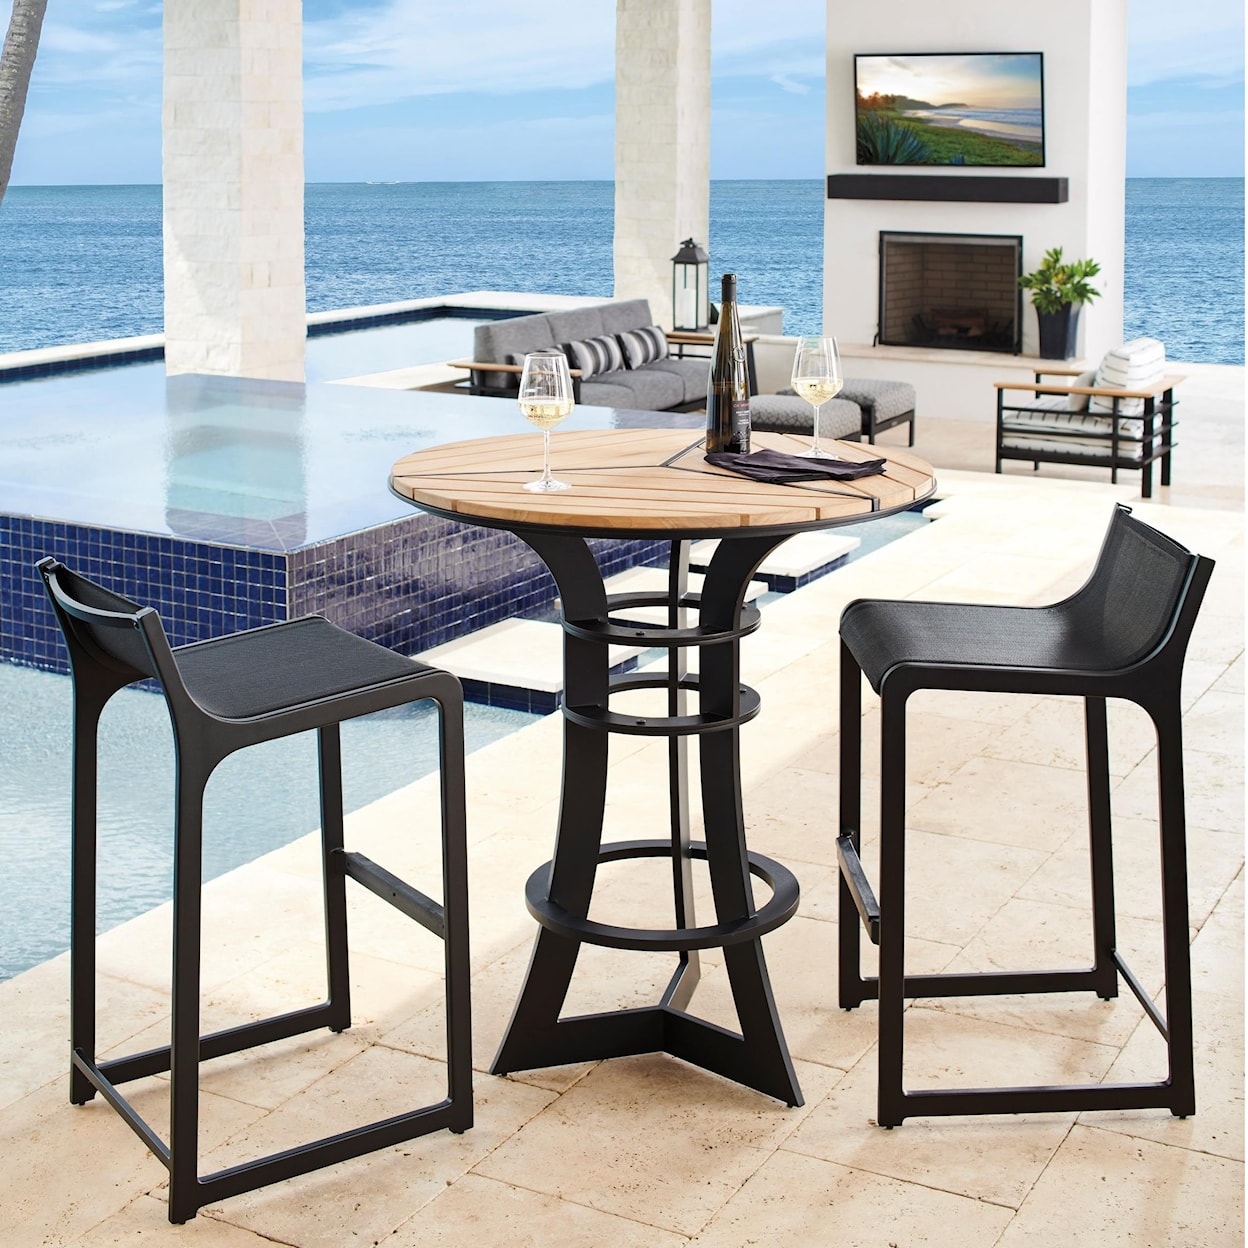 Tommy Bahama Outdoor Living South Beach 3-Piece Outdoor Bistro Set w/ Bar Stools